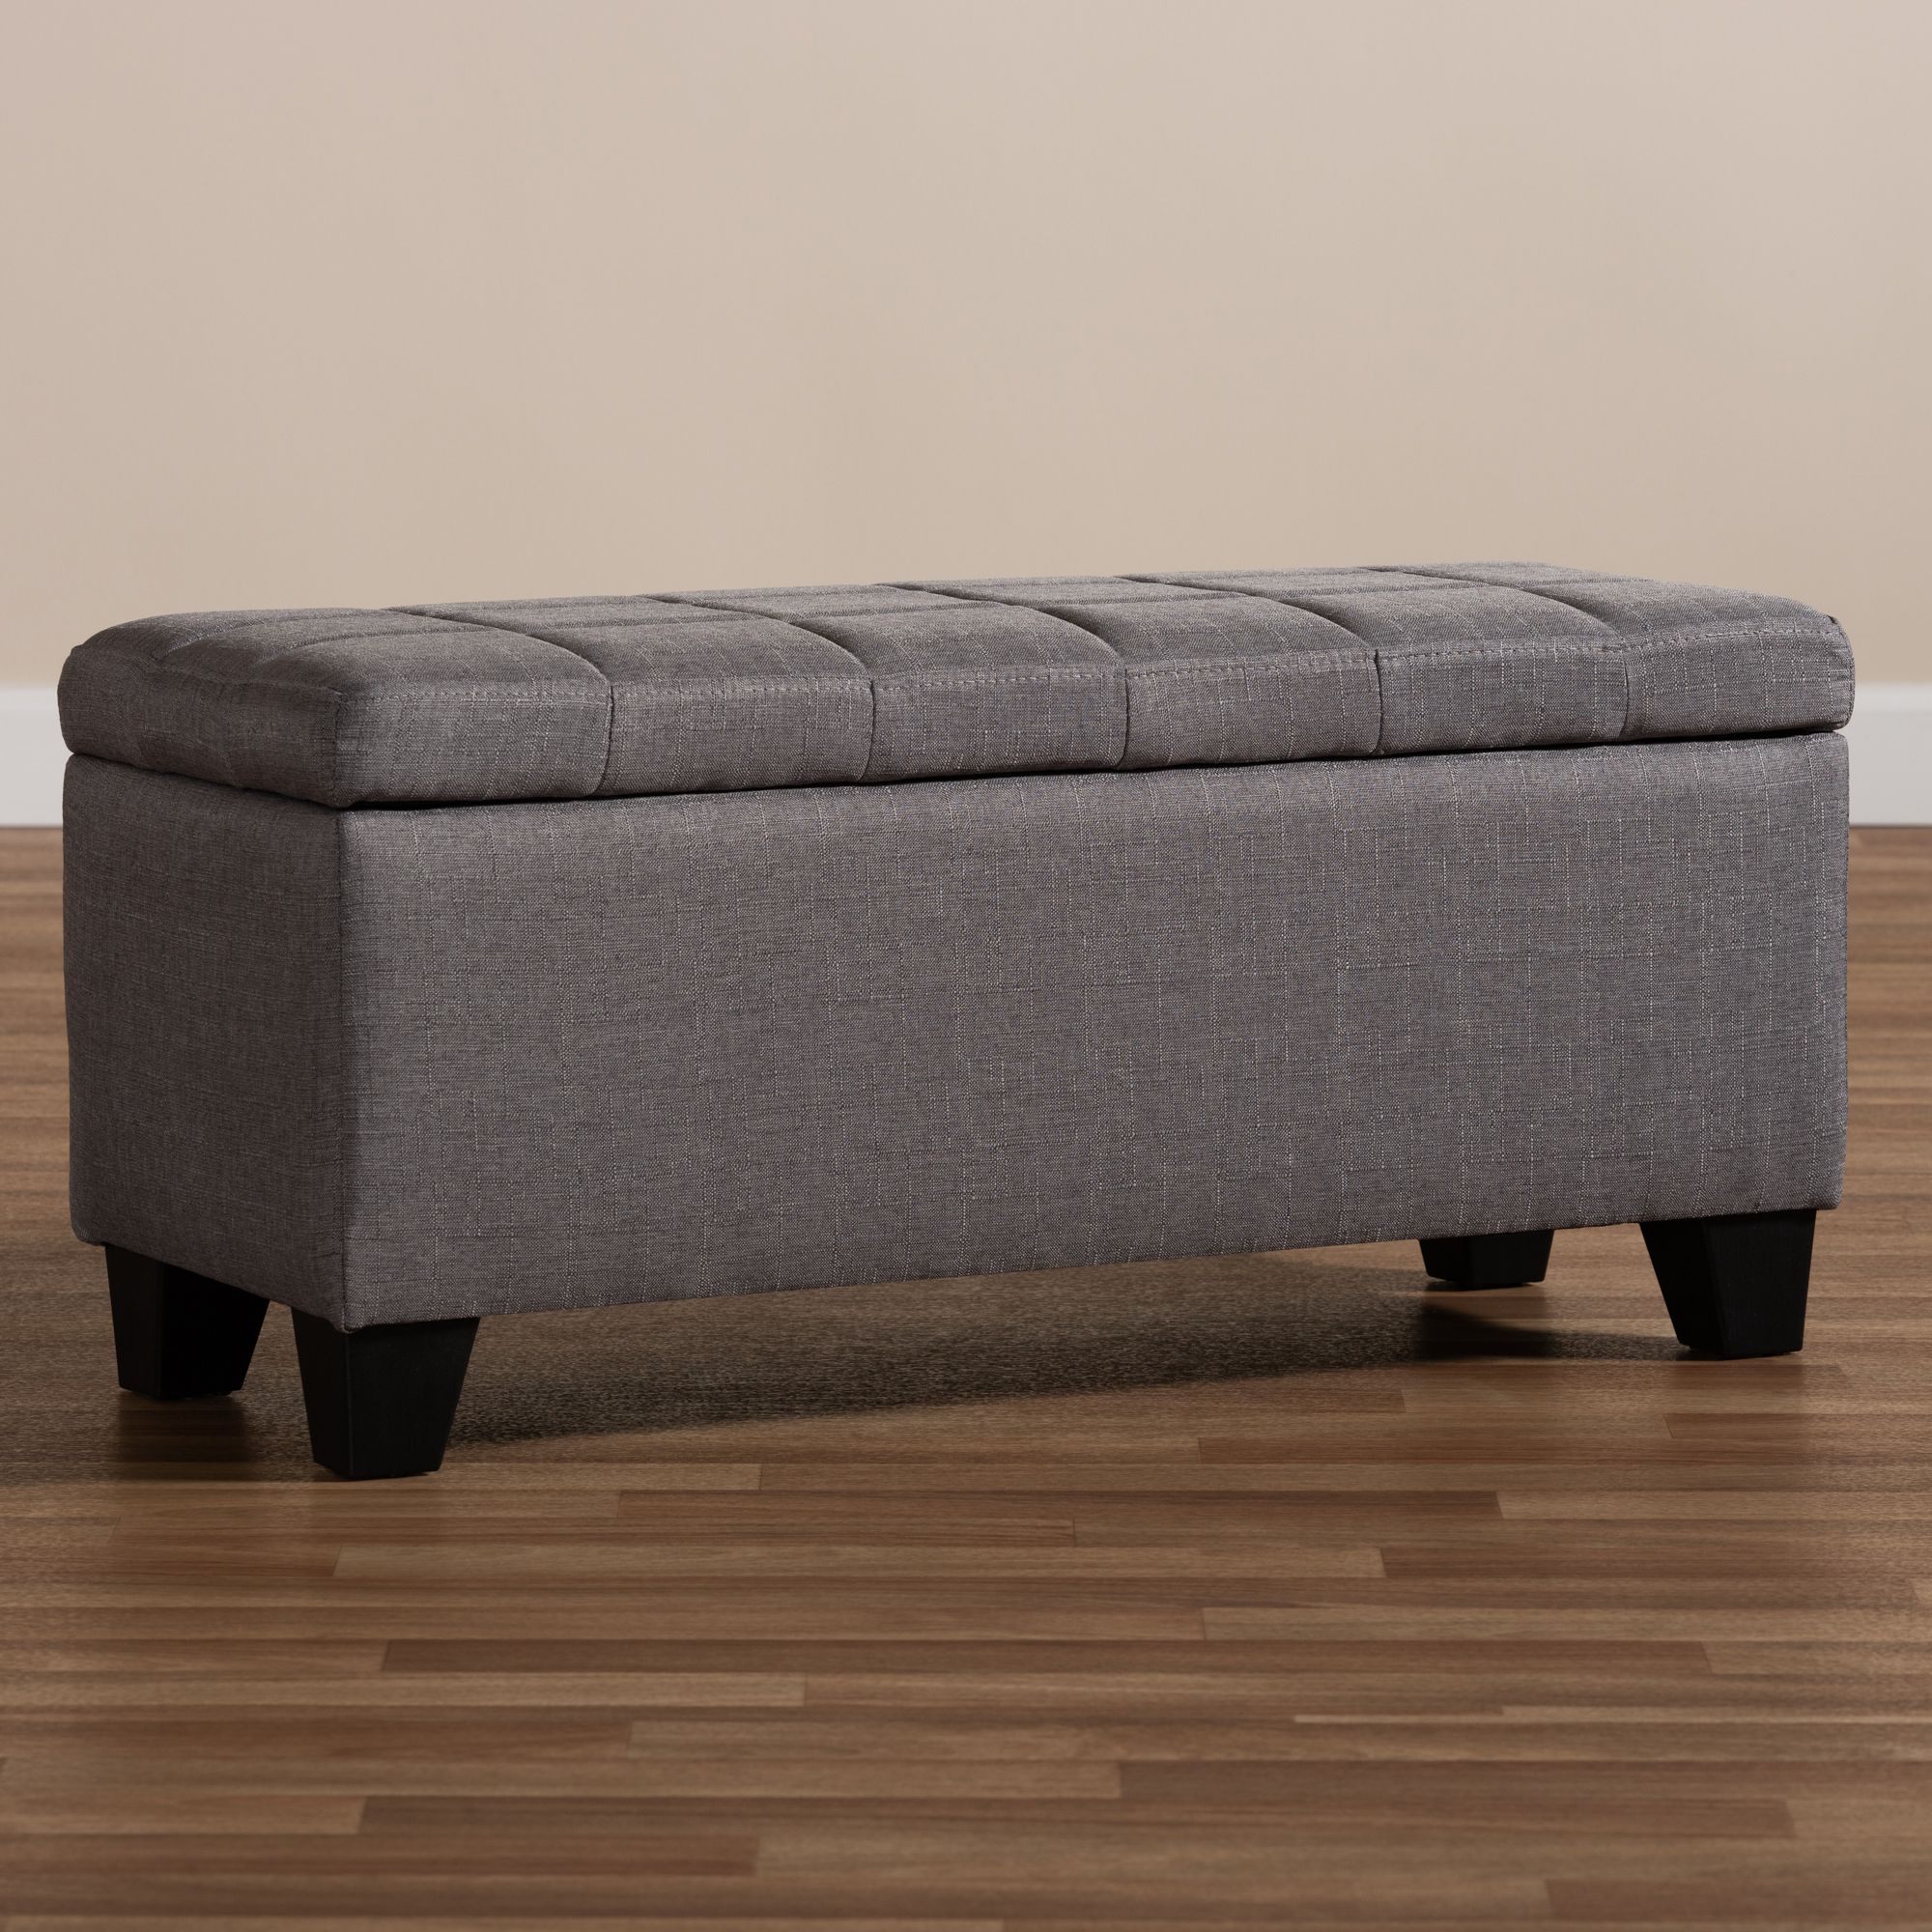 Well Liked Fabric Tufted Storage Ottomans Throughout Fera Contemporary Biscuit Tufted Fabric Upholstery 35" Storage Bench (View 2 of 10)